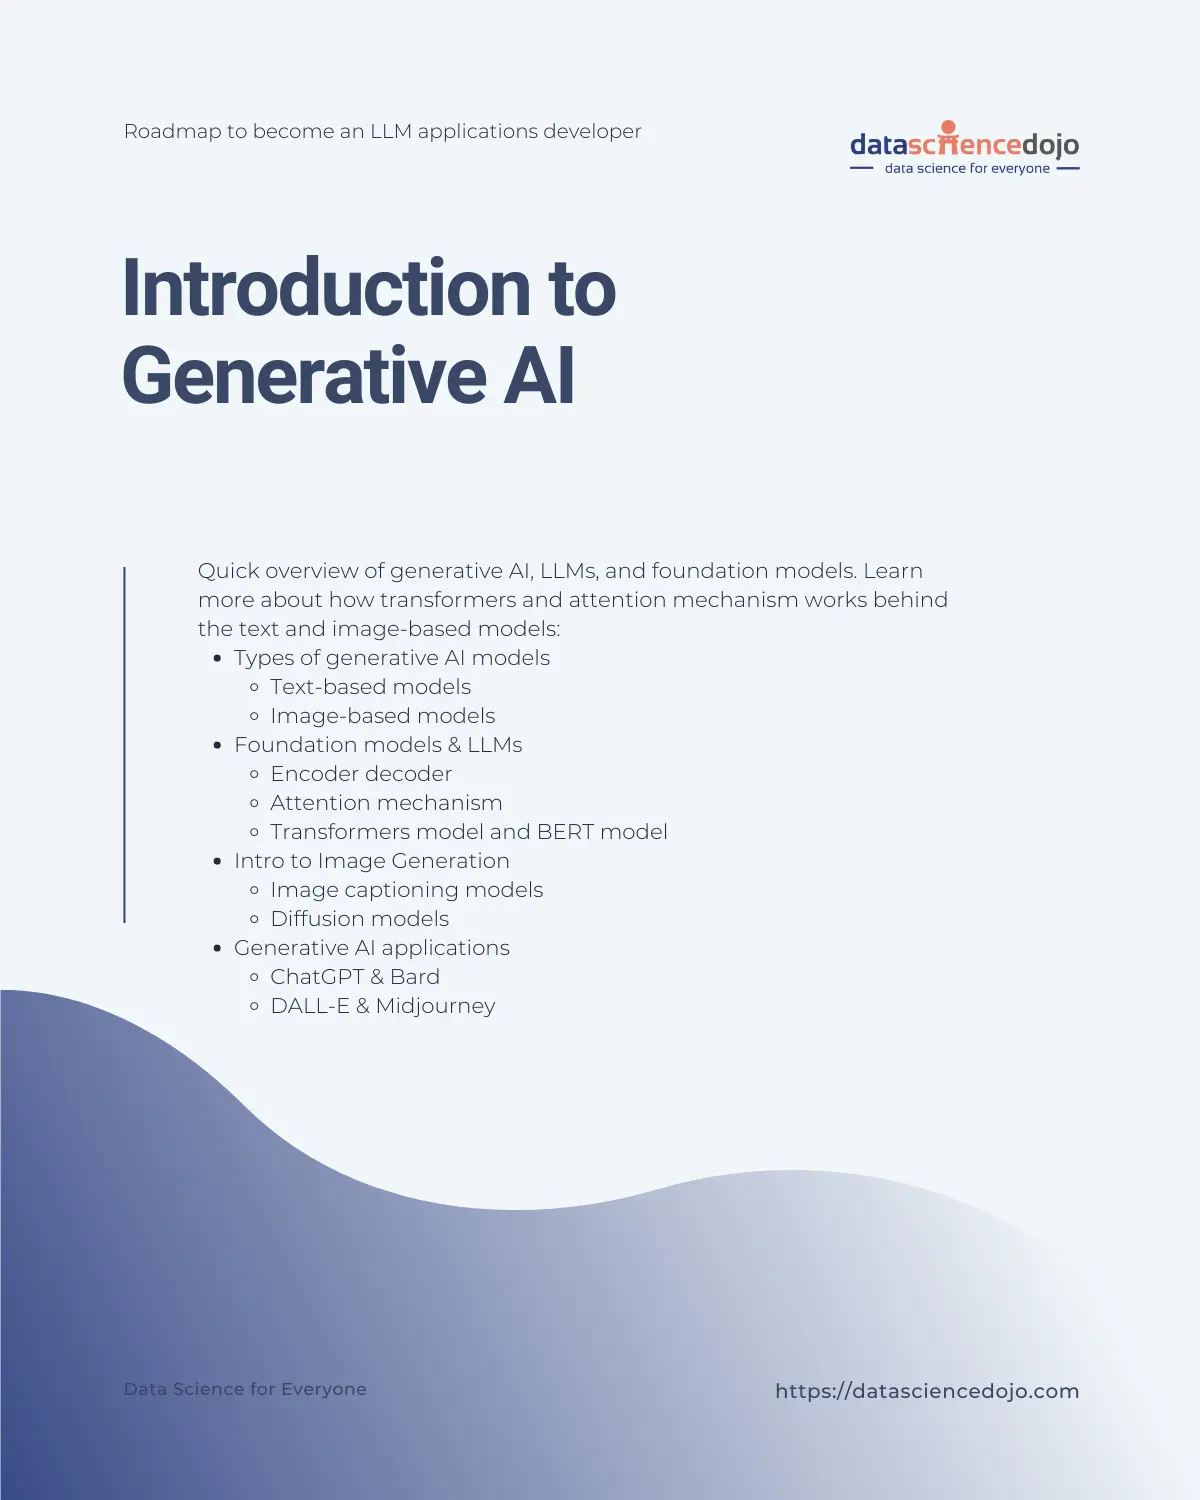 Introduction to Generative AI - LLM Bootcamp Data Science Dojo